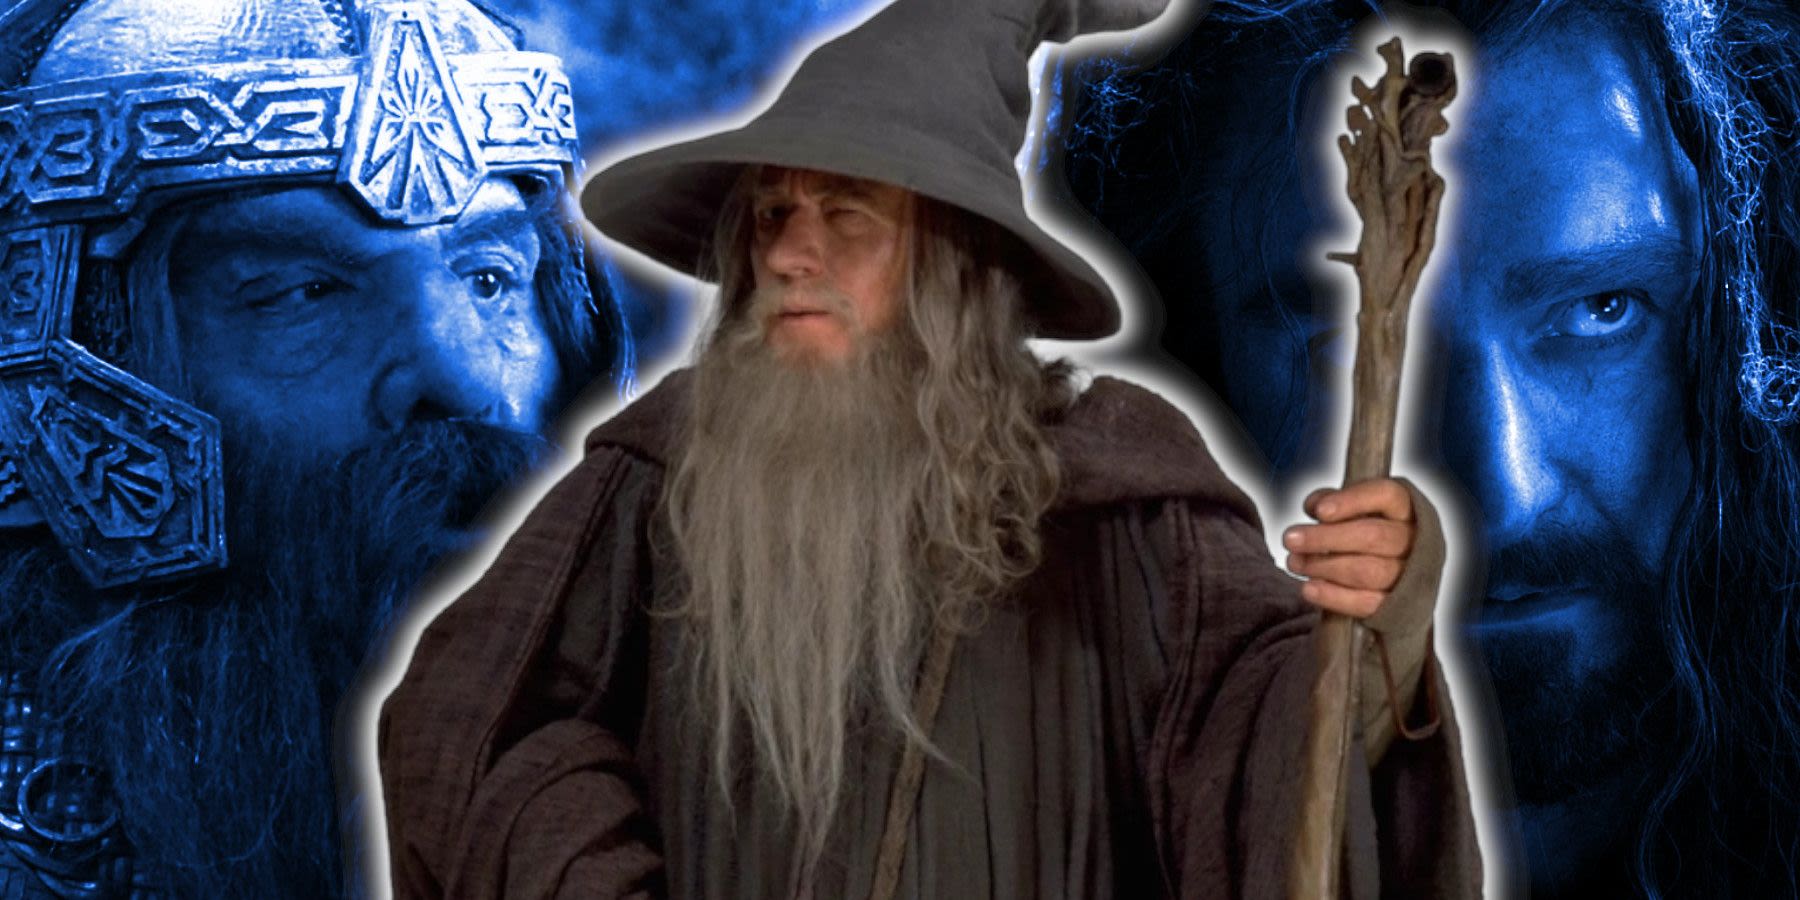 Gandalf Did Not Know the Dwarves' Greatest Secret, But Another The Lord of the Rings Character Did